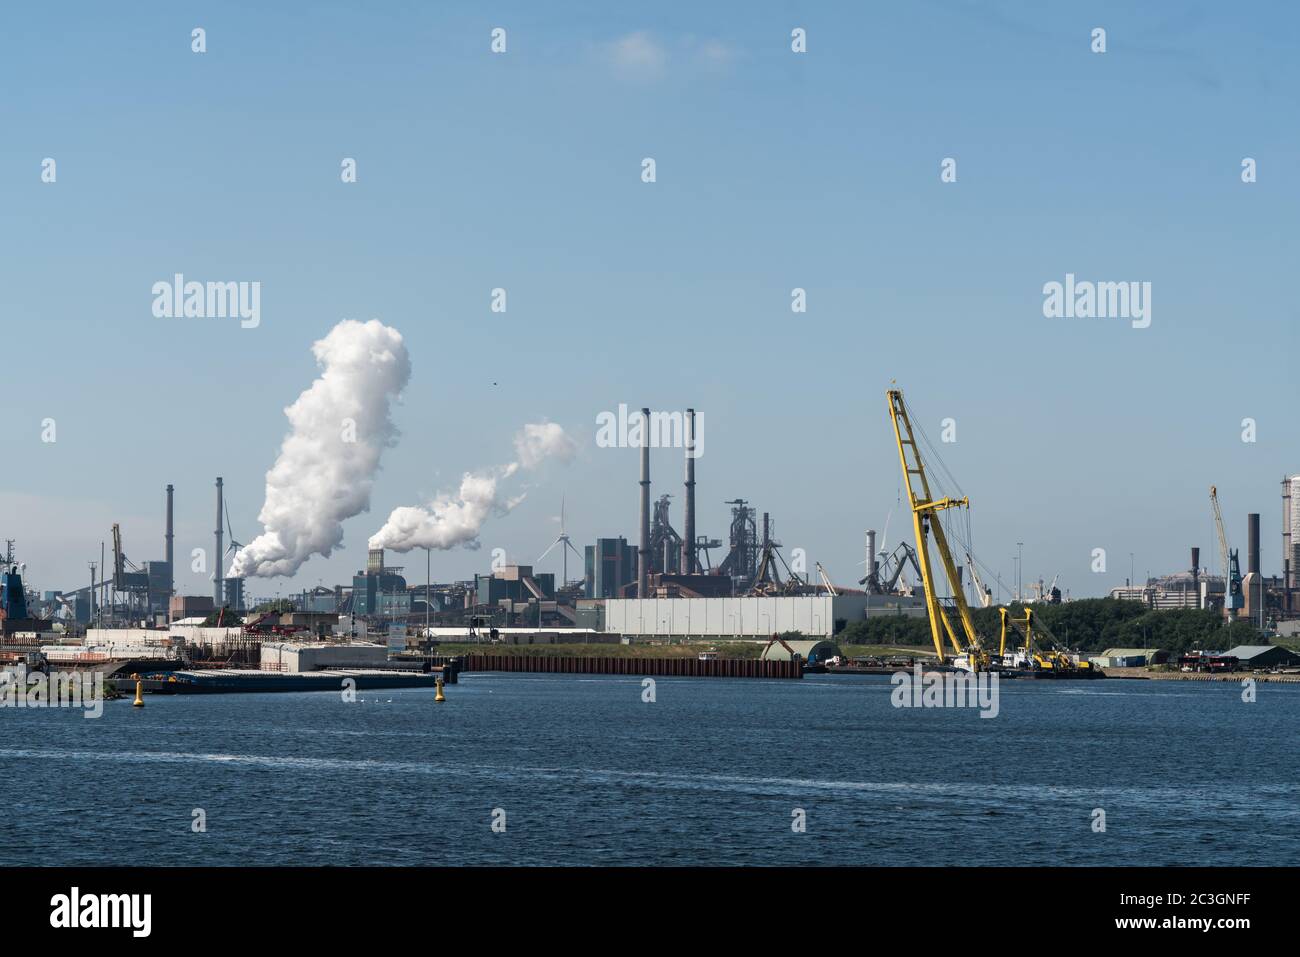 19 june 2020, IJmuiden, THe NEtherlands - Tata Steel, blast furnaces factory where metal is made in the harbour of the town of IJmuiden Stock Photo